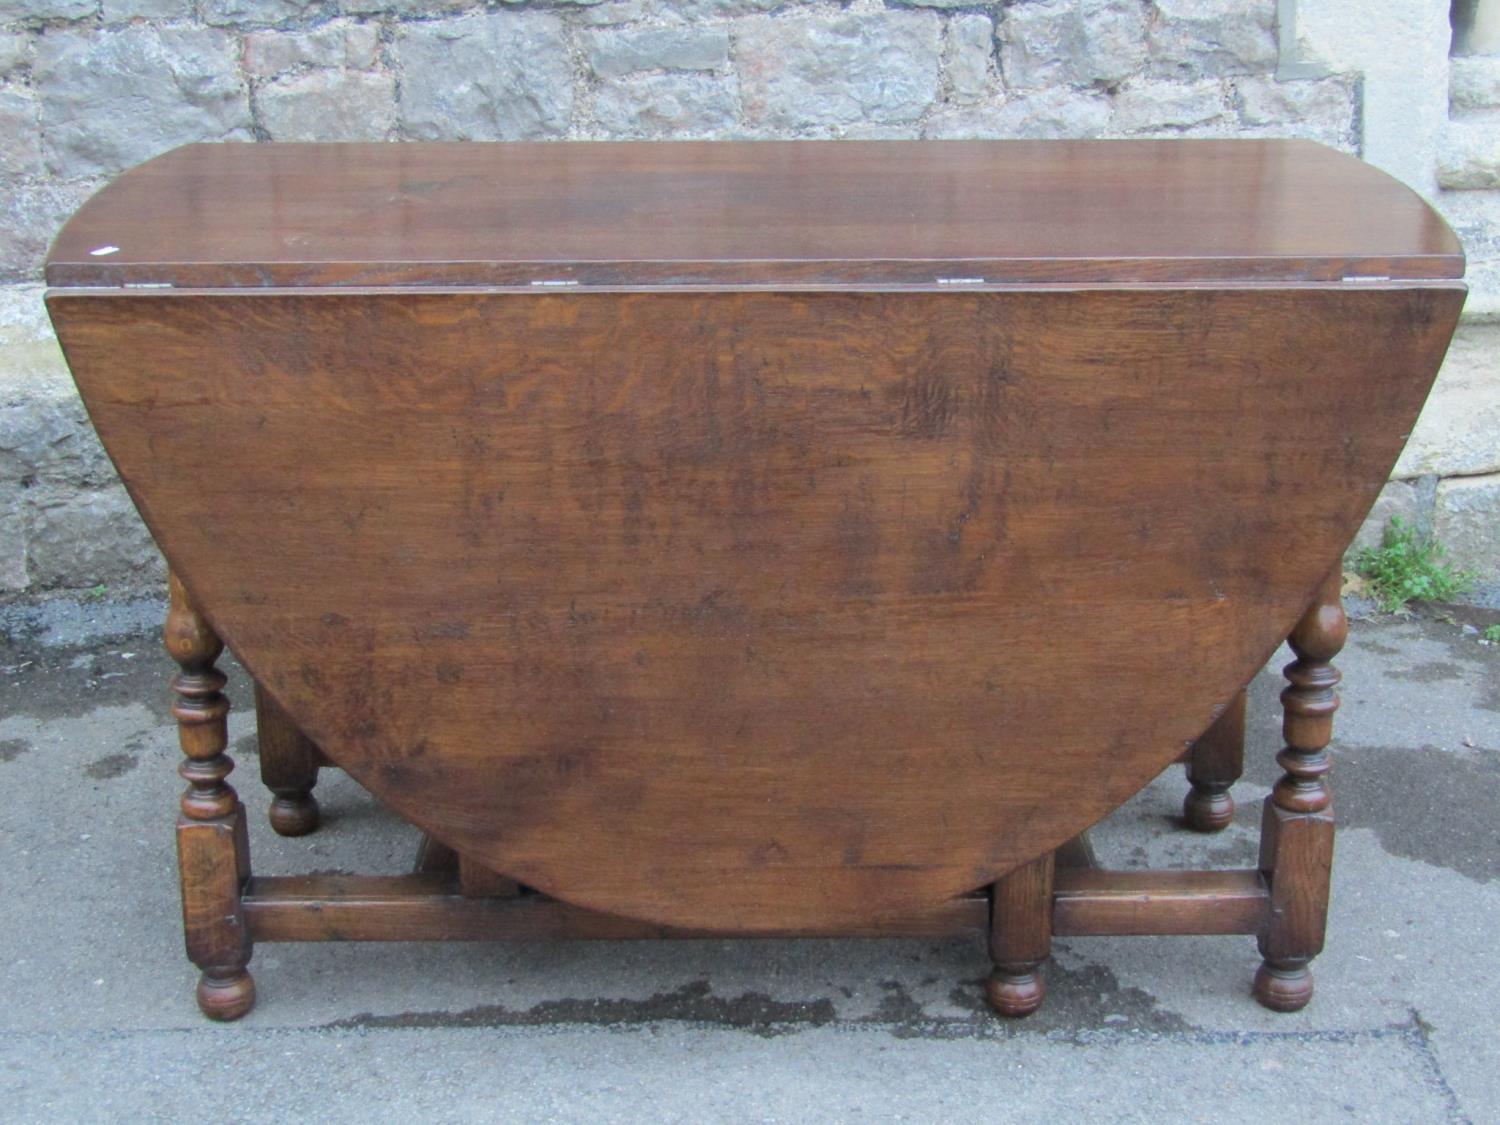 A good quality reproduction old English style oak oval drop leaf gateleg dining table with